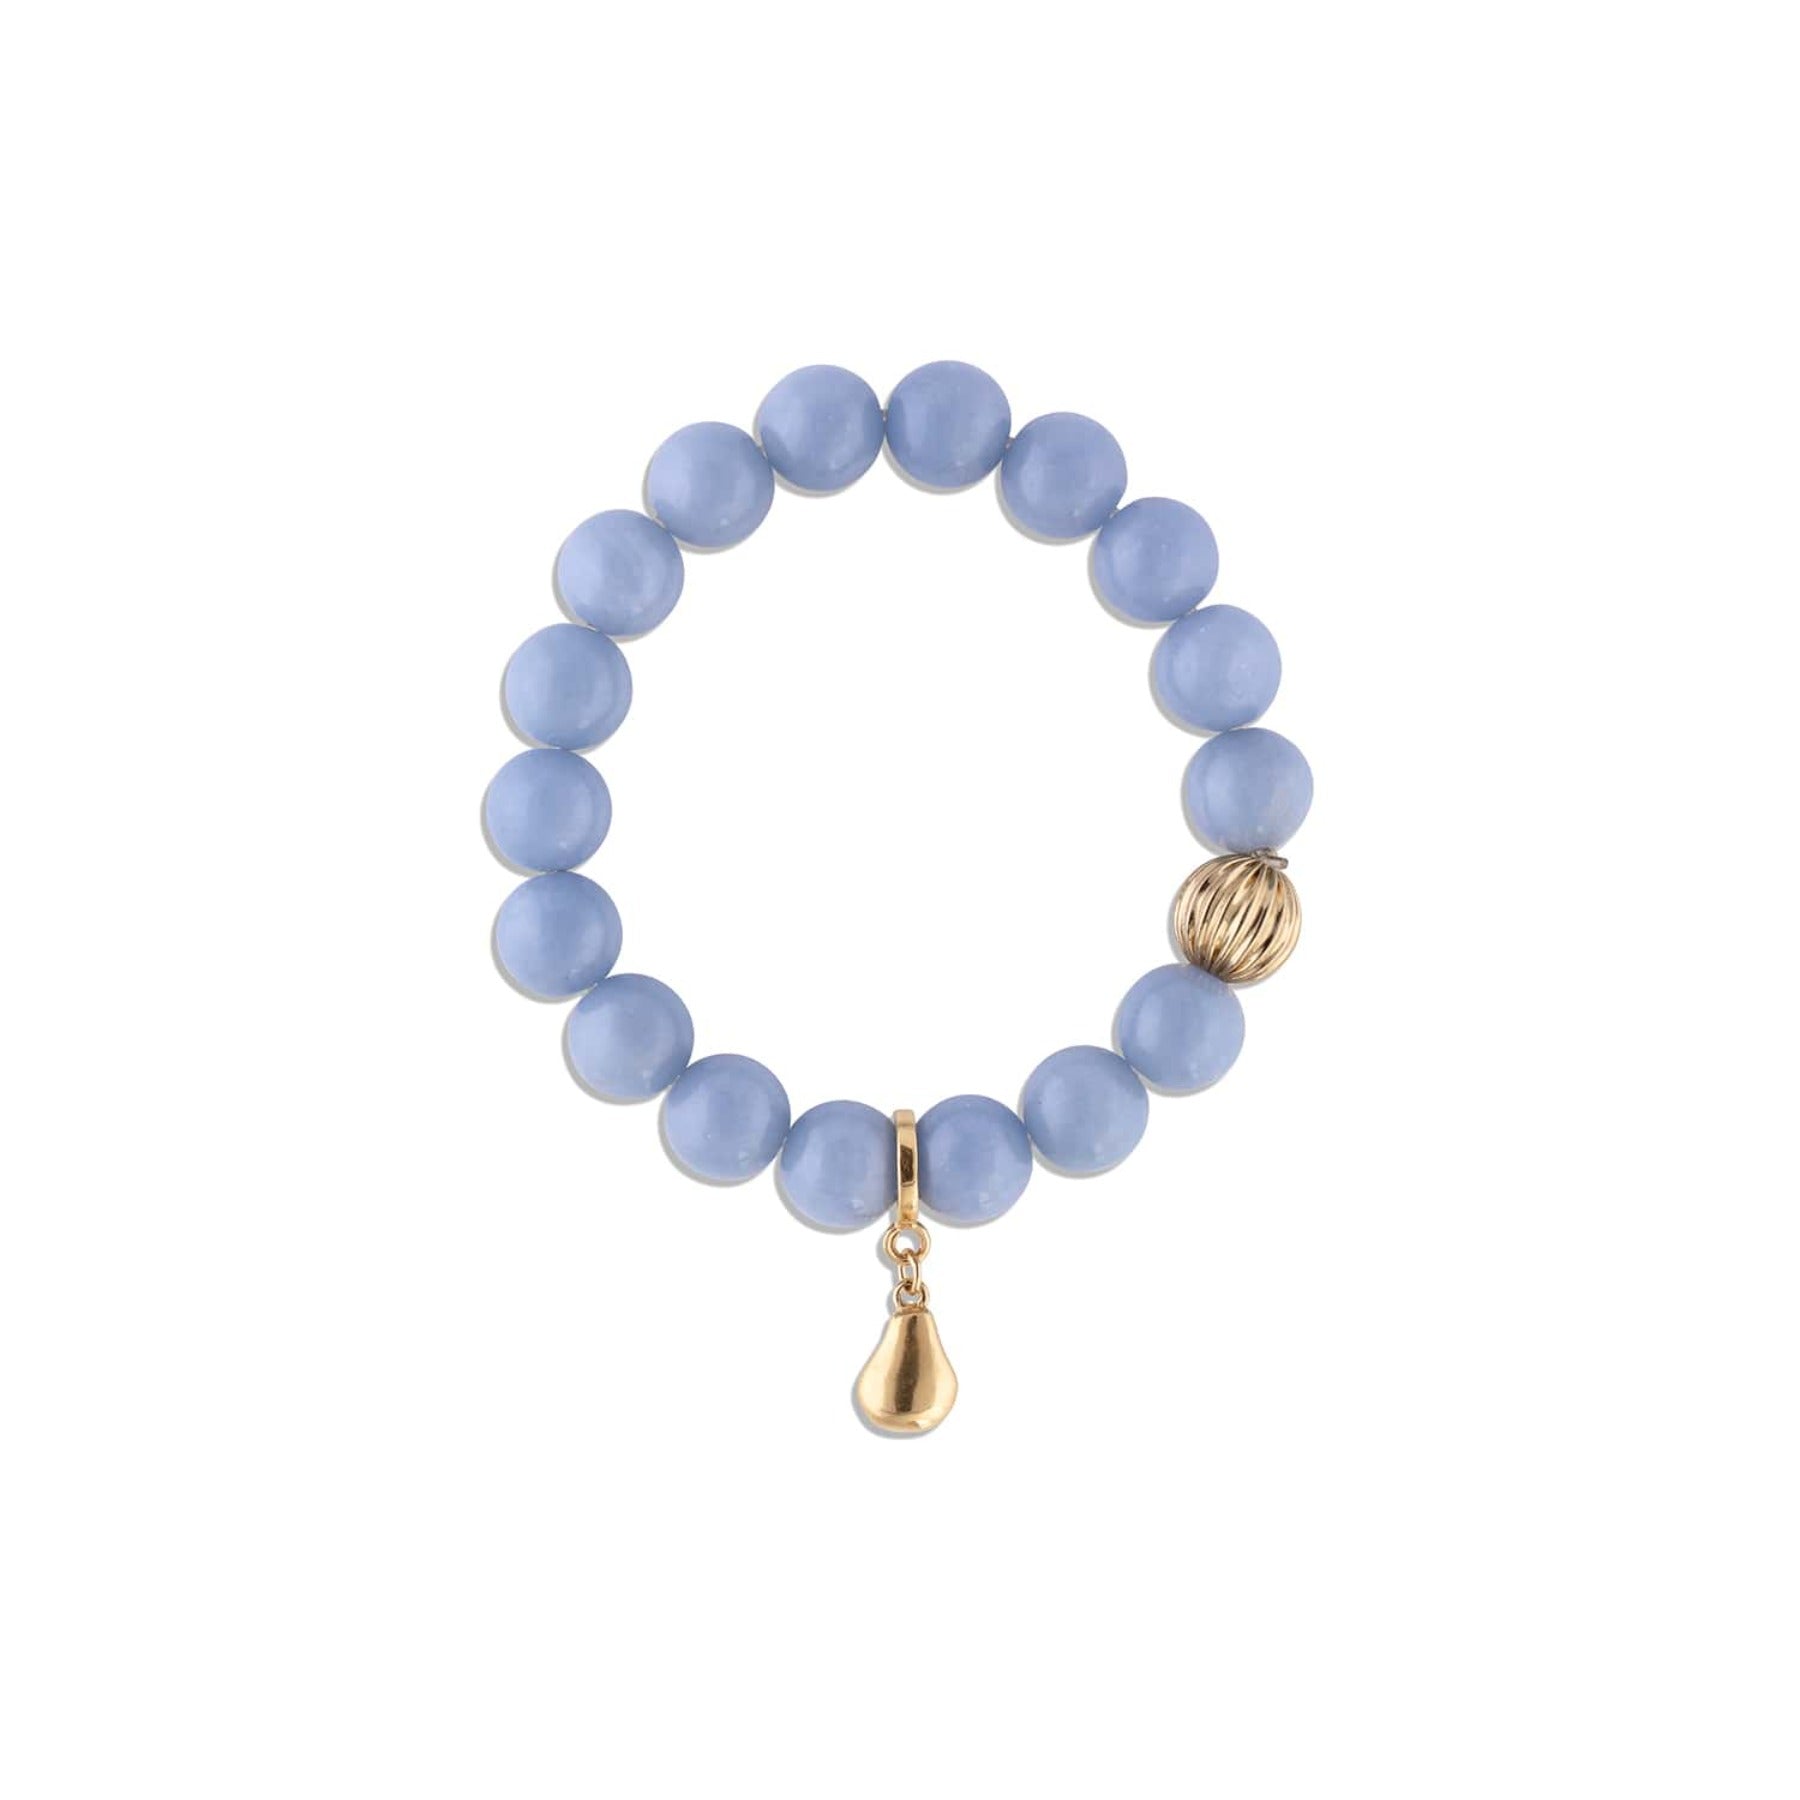 Light blue angelite crystal smooth gemstone elastic bracelet with 14k gold corrugated bead and pear charm.